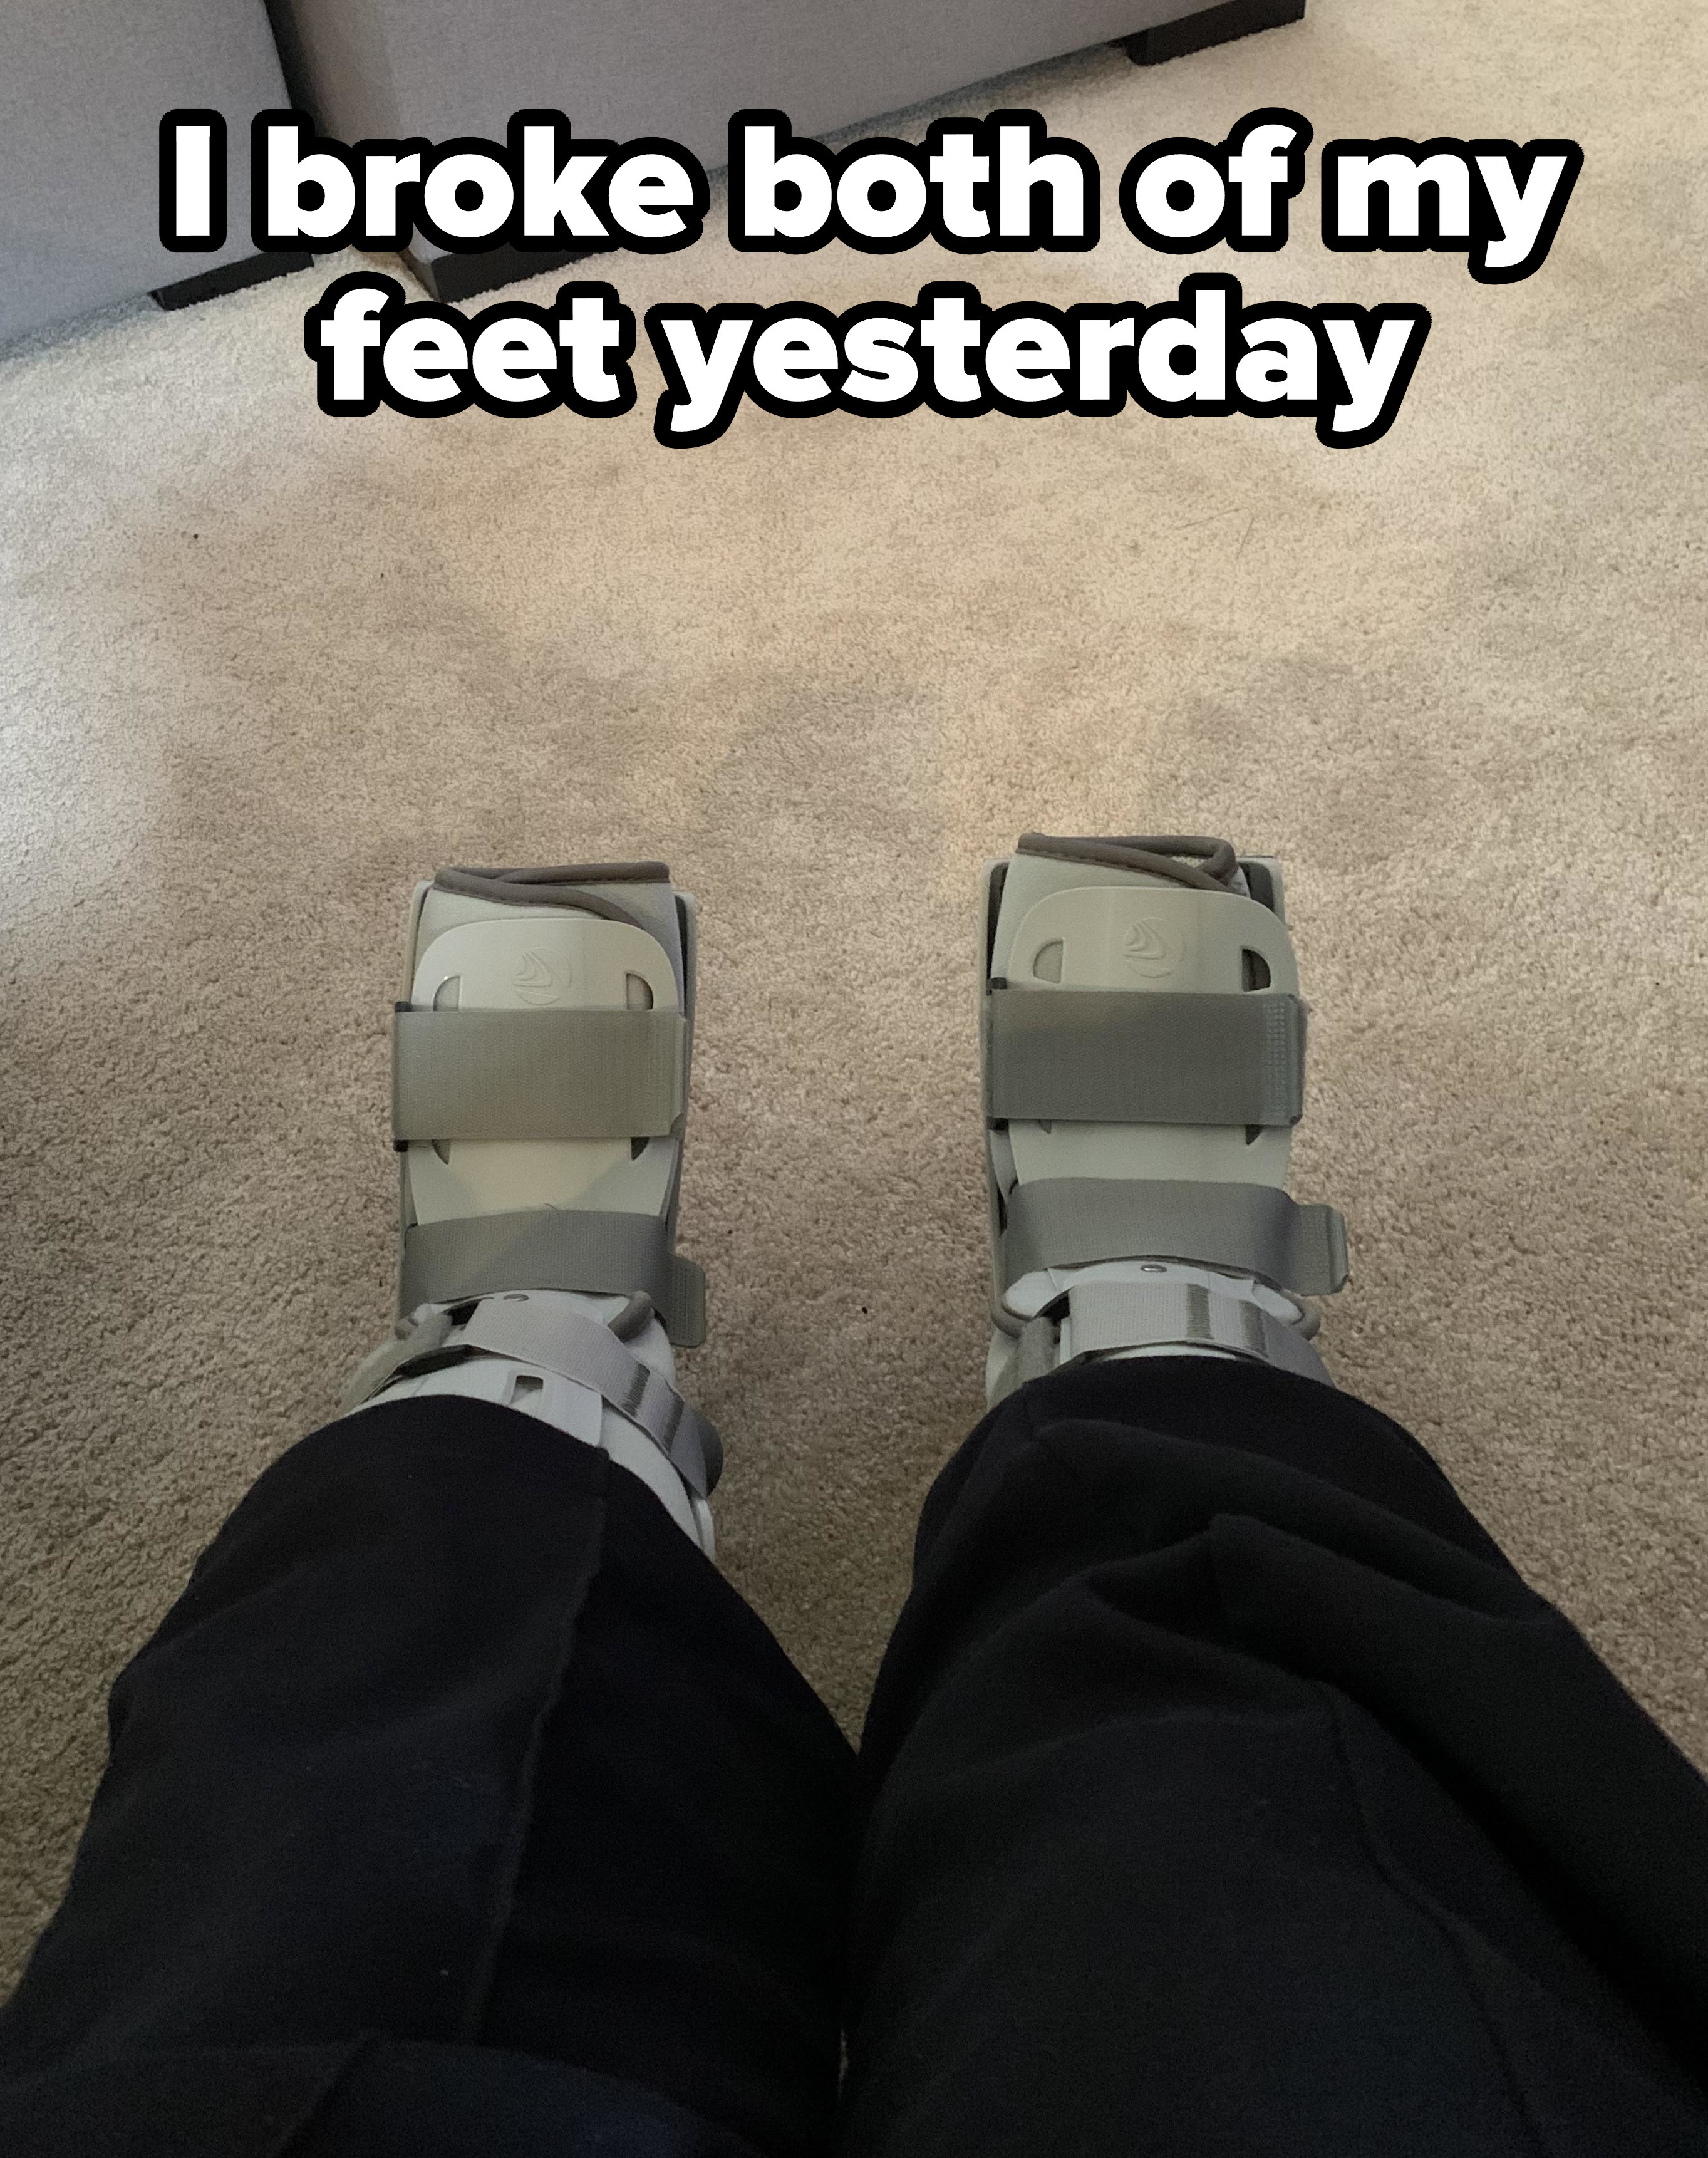 Person broke both feet, and both feet are in foot braces